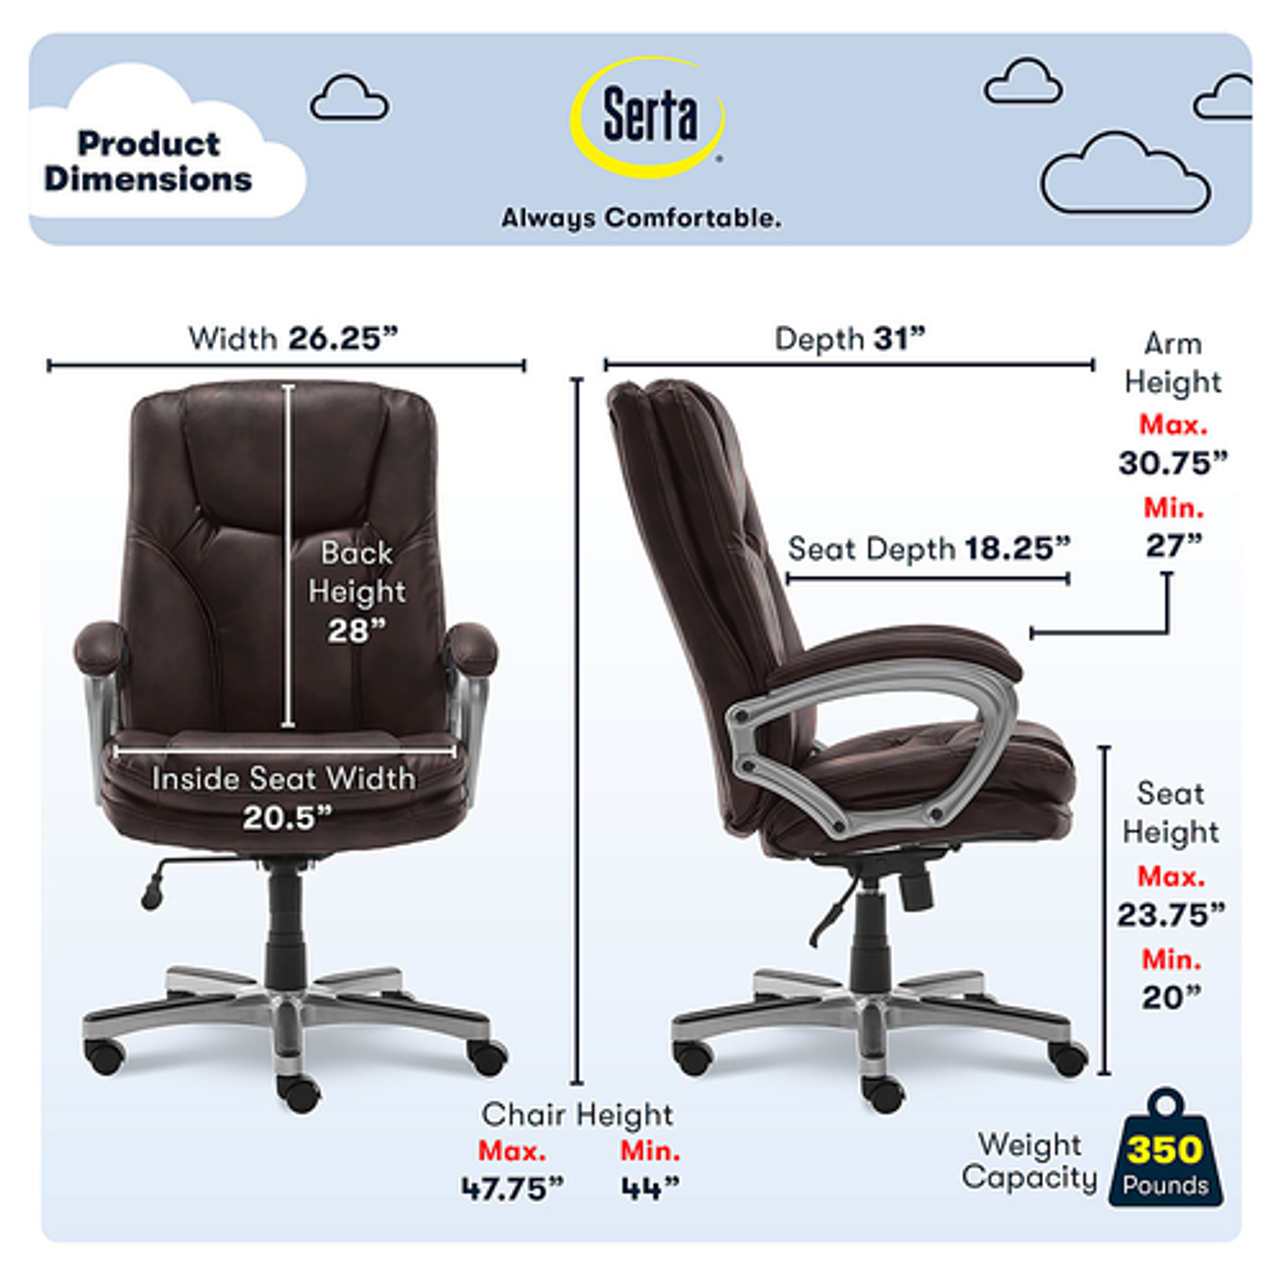 Serta - Benton Big and Tall Puresoft Faux Leather Executive Office Chair - 350 lb capacity - Chestnut